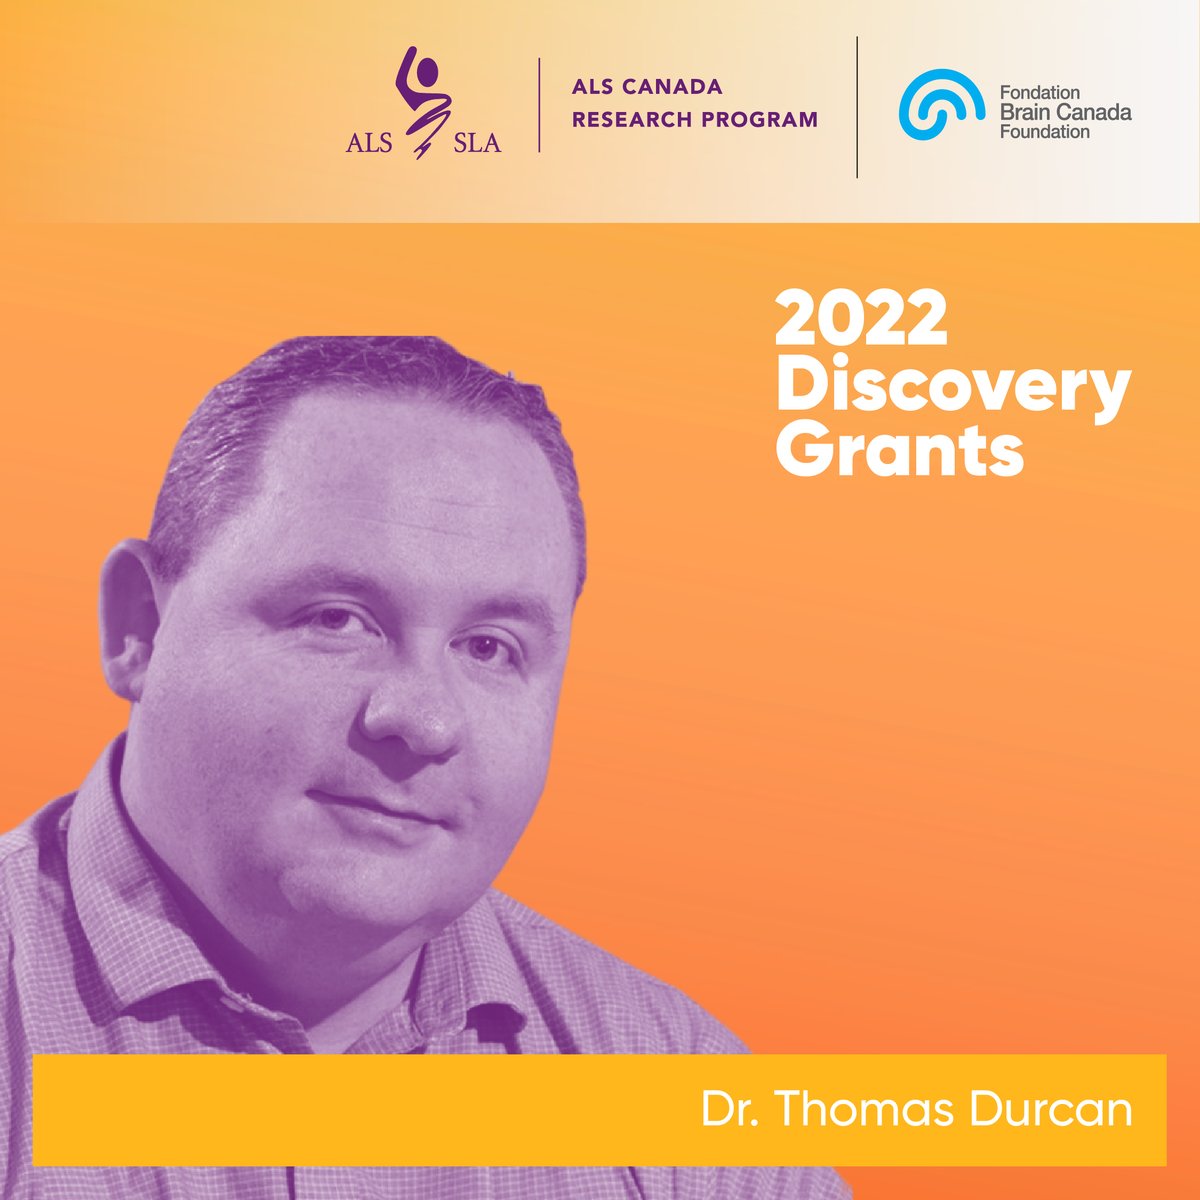 Dr. Thomas Durcan and his team dig into an innovative model ten years in the making to gain new insights into #ALS through 3D brain models with the support of the 2022 ALS Canada-@BrainCanada Discovery Grant. Read more about the project by visiting bit.ly/3Z57ftw.